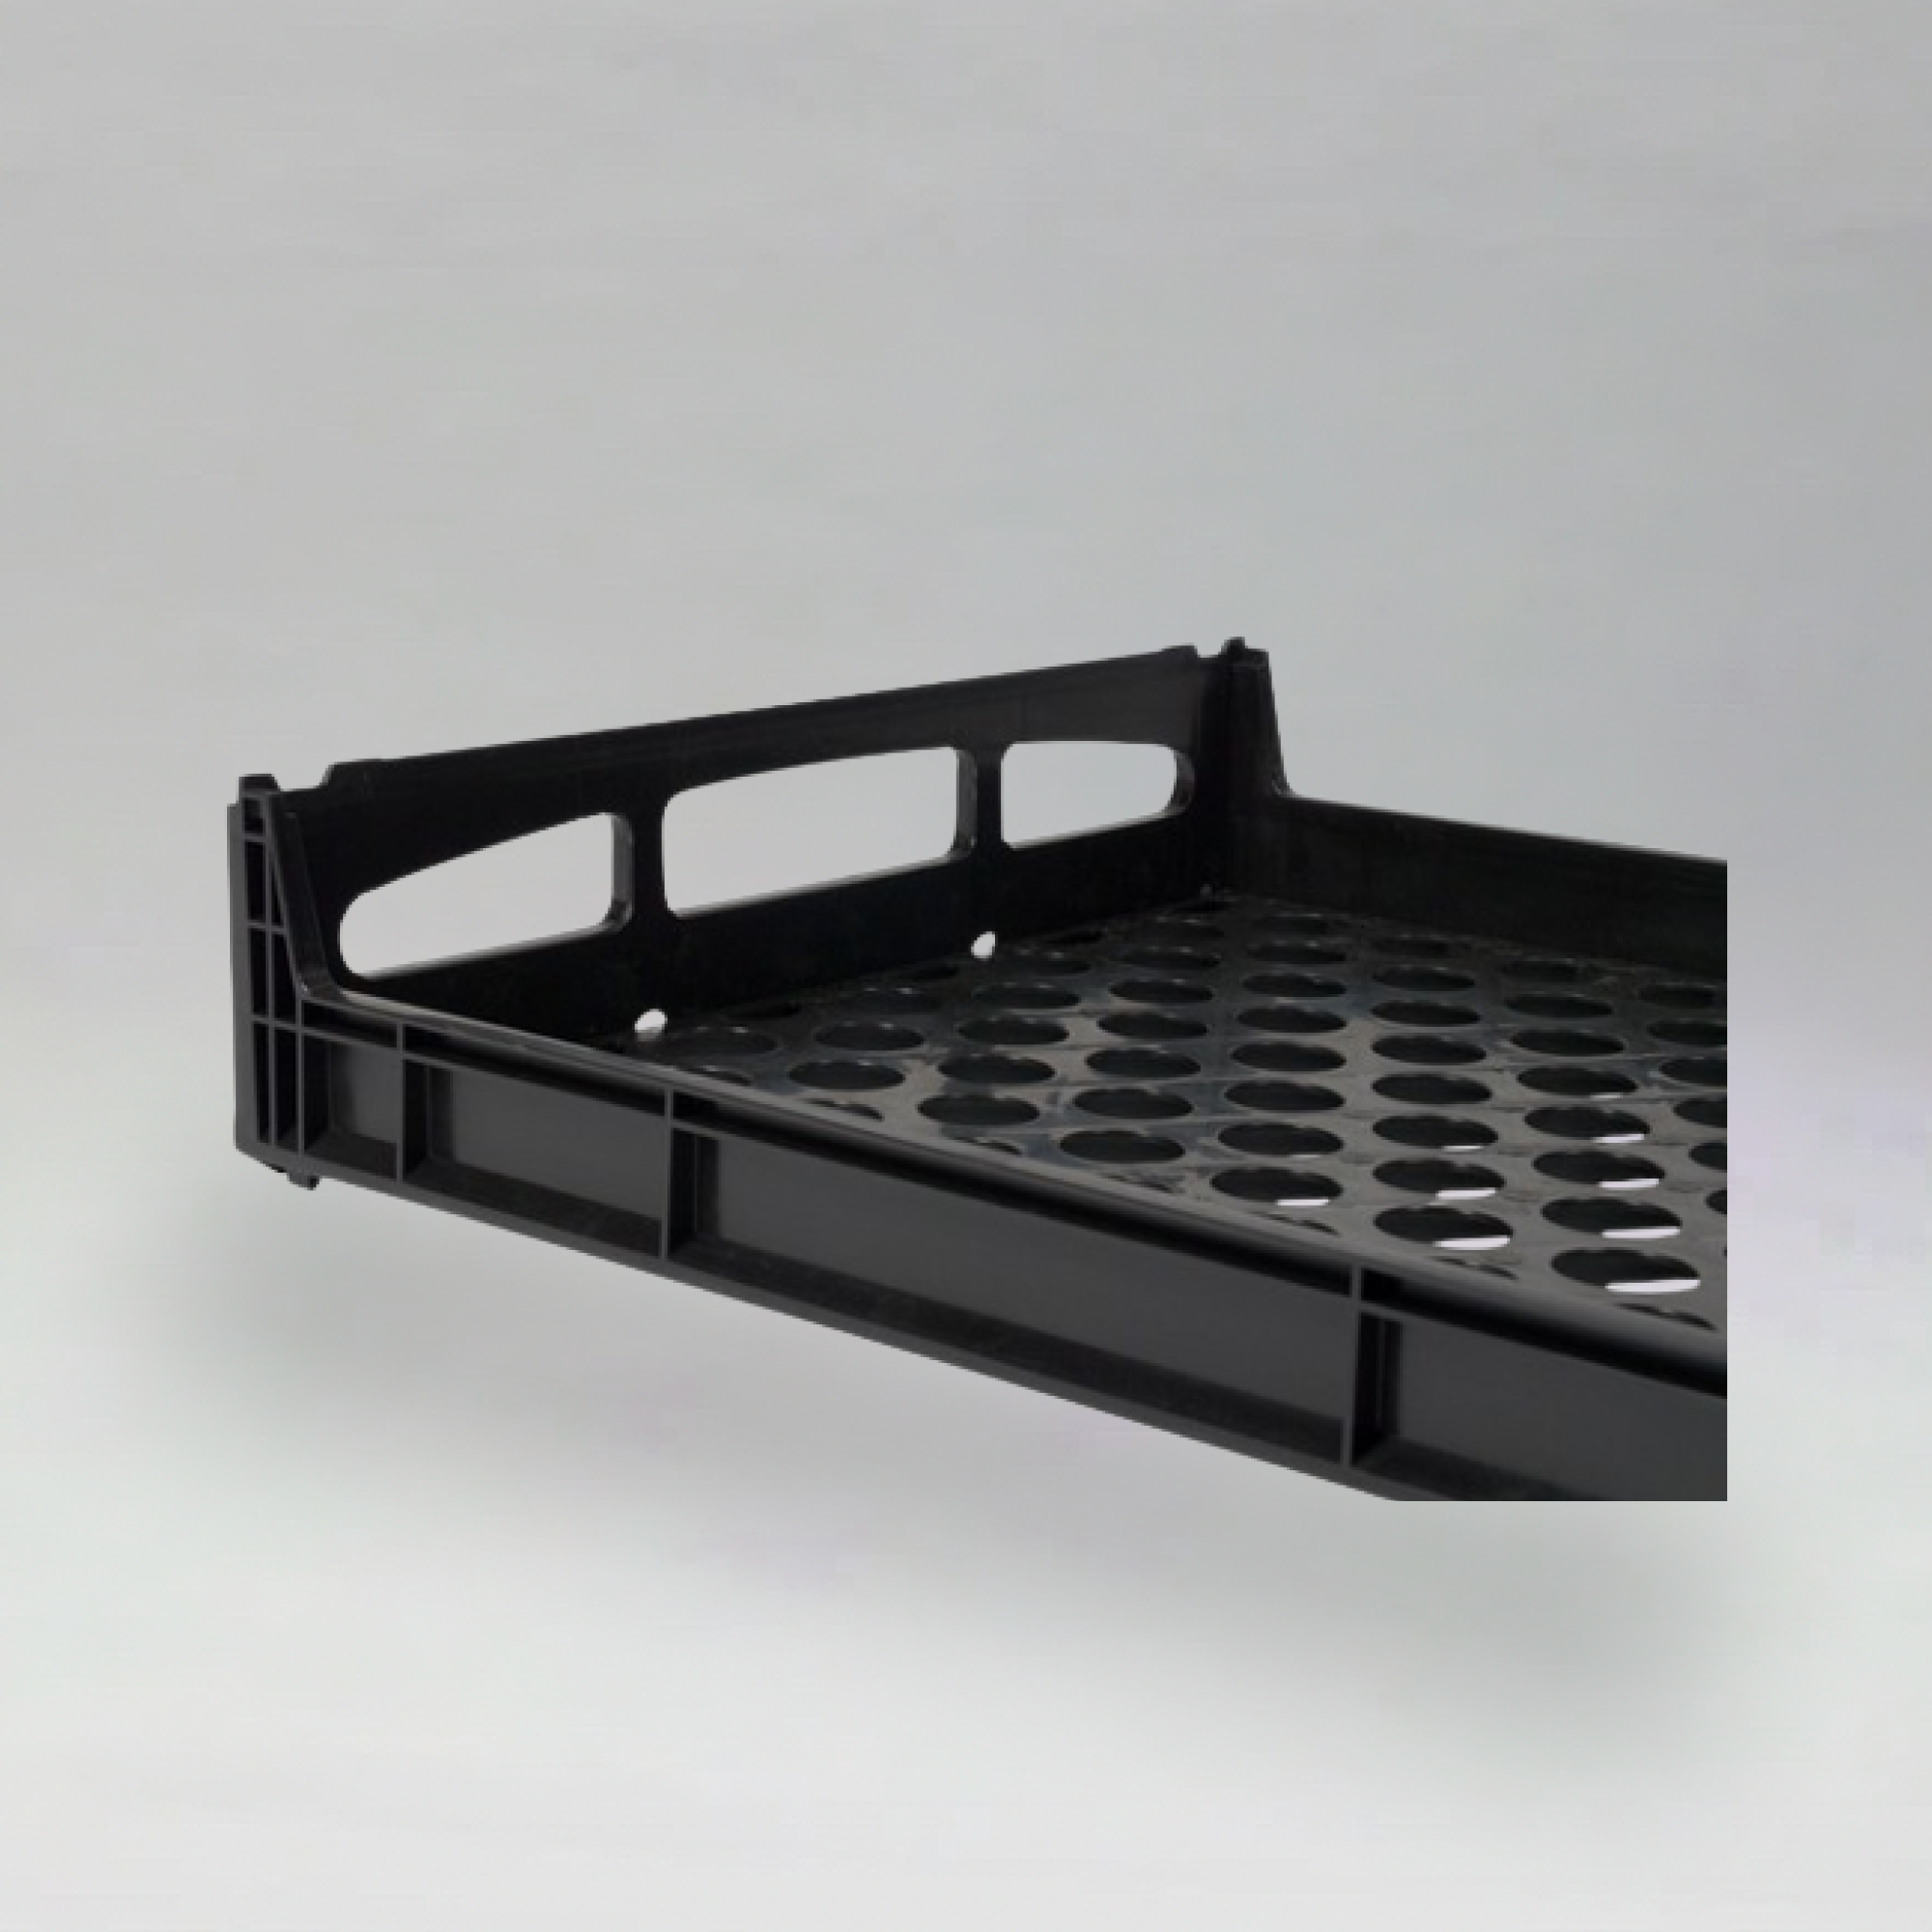 Bread Crate - Black in stock / Grey subject to MOQ